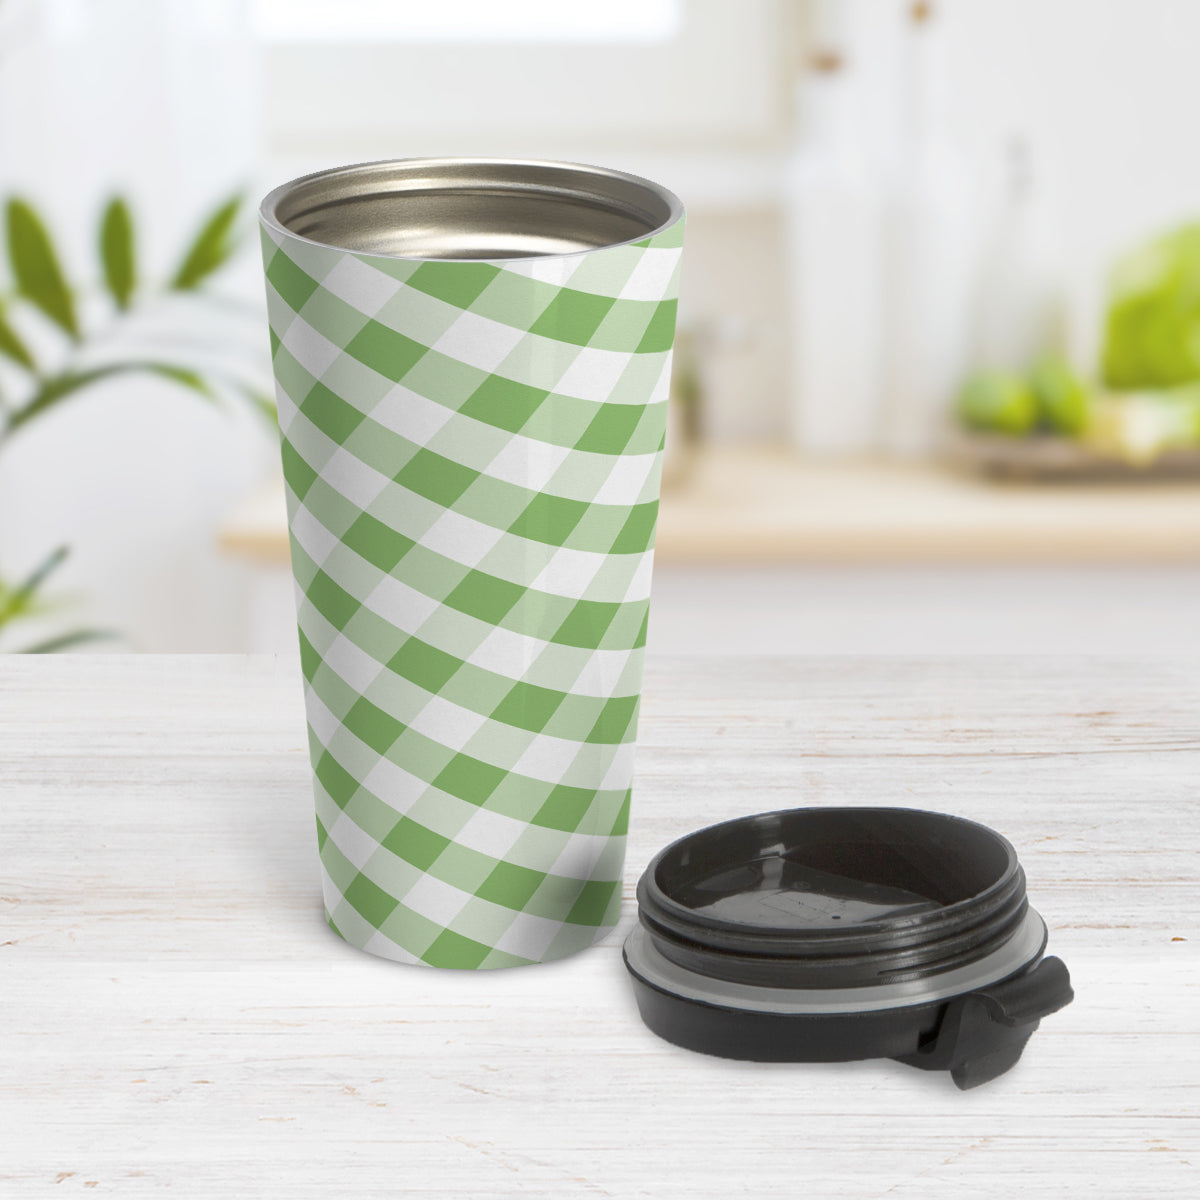 Green Gingham Travel Mug (15oz) at Amy's Coffee Mugs. A travel mug designed with a slanted green and white gingham pattern that wraps around the travel mug. Photo shows the mug open on a table with its lid beside it.